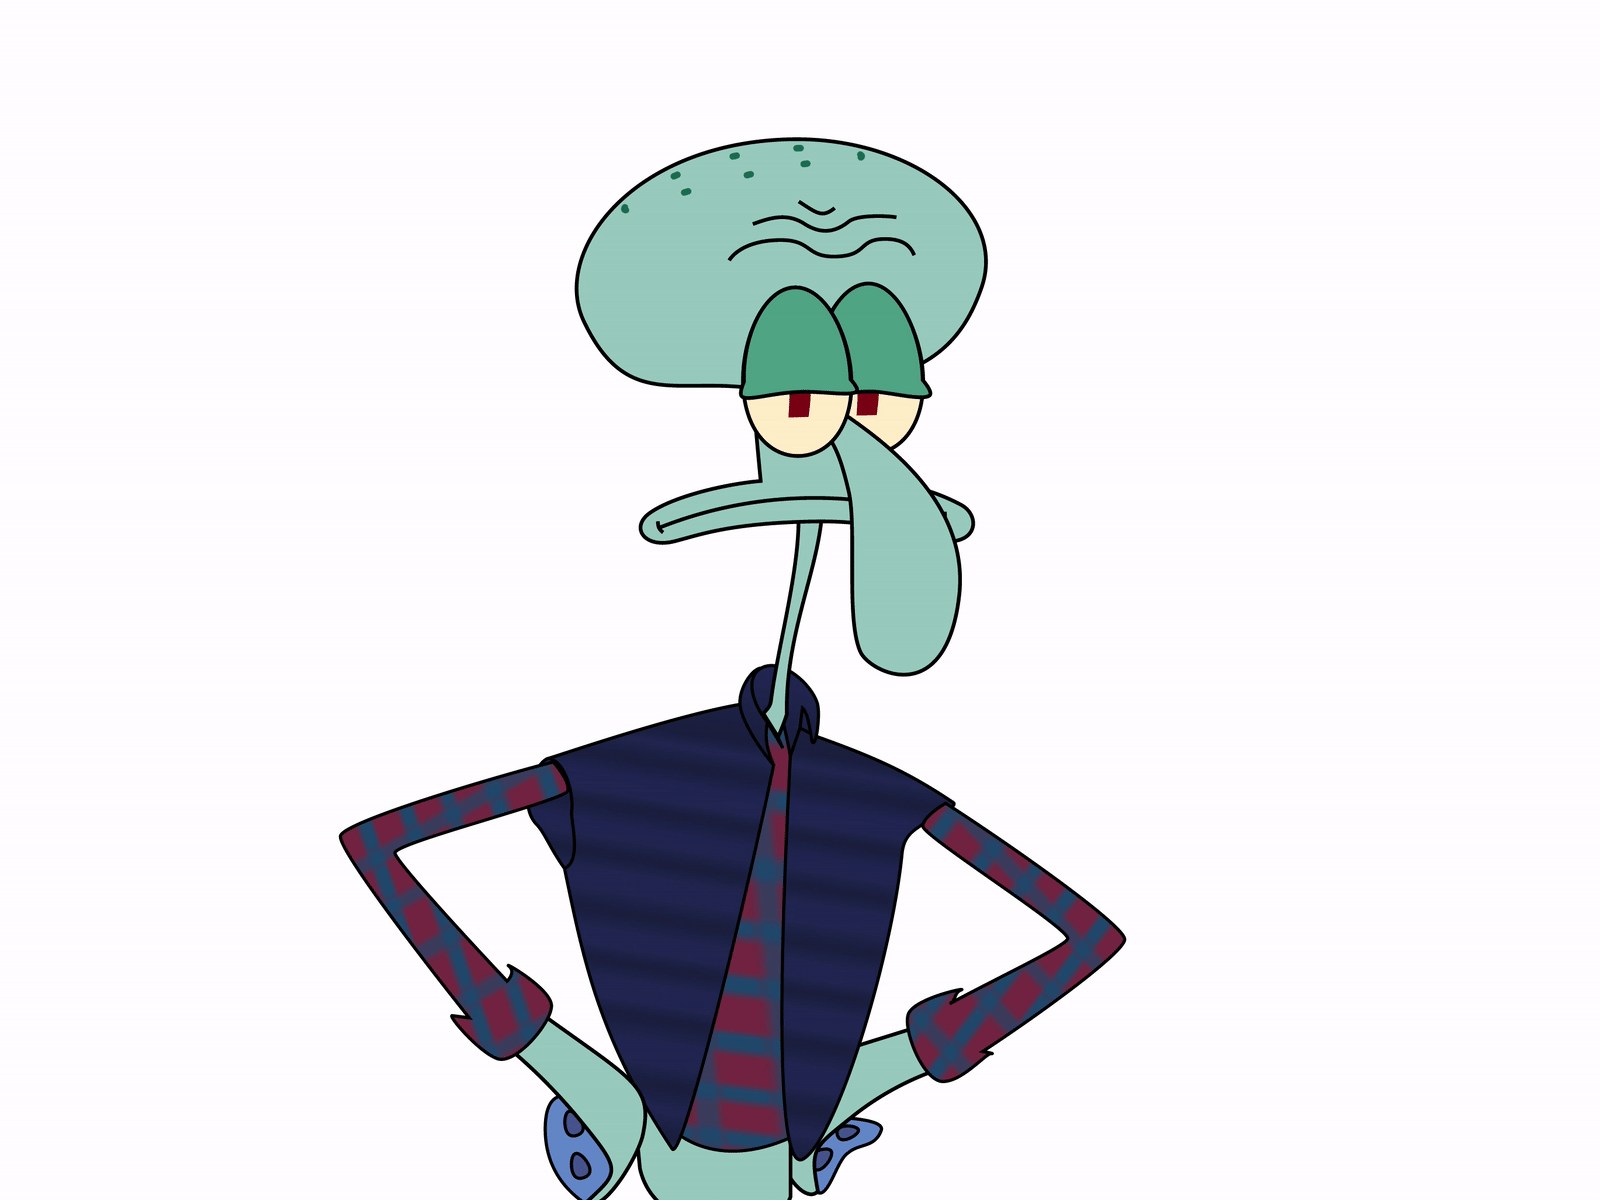 Squidward has the disappoint animation cartoon cartoon character disappointed disgusted fanart fed up figma handsonhips illustration meme spongebob squidward